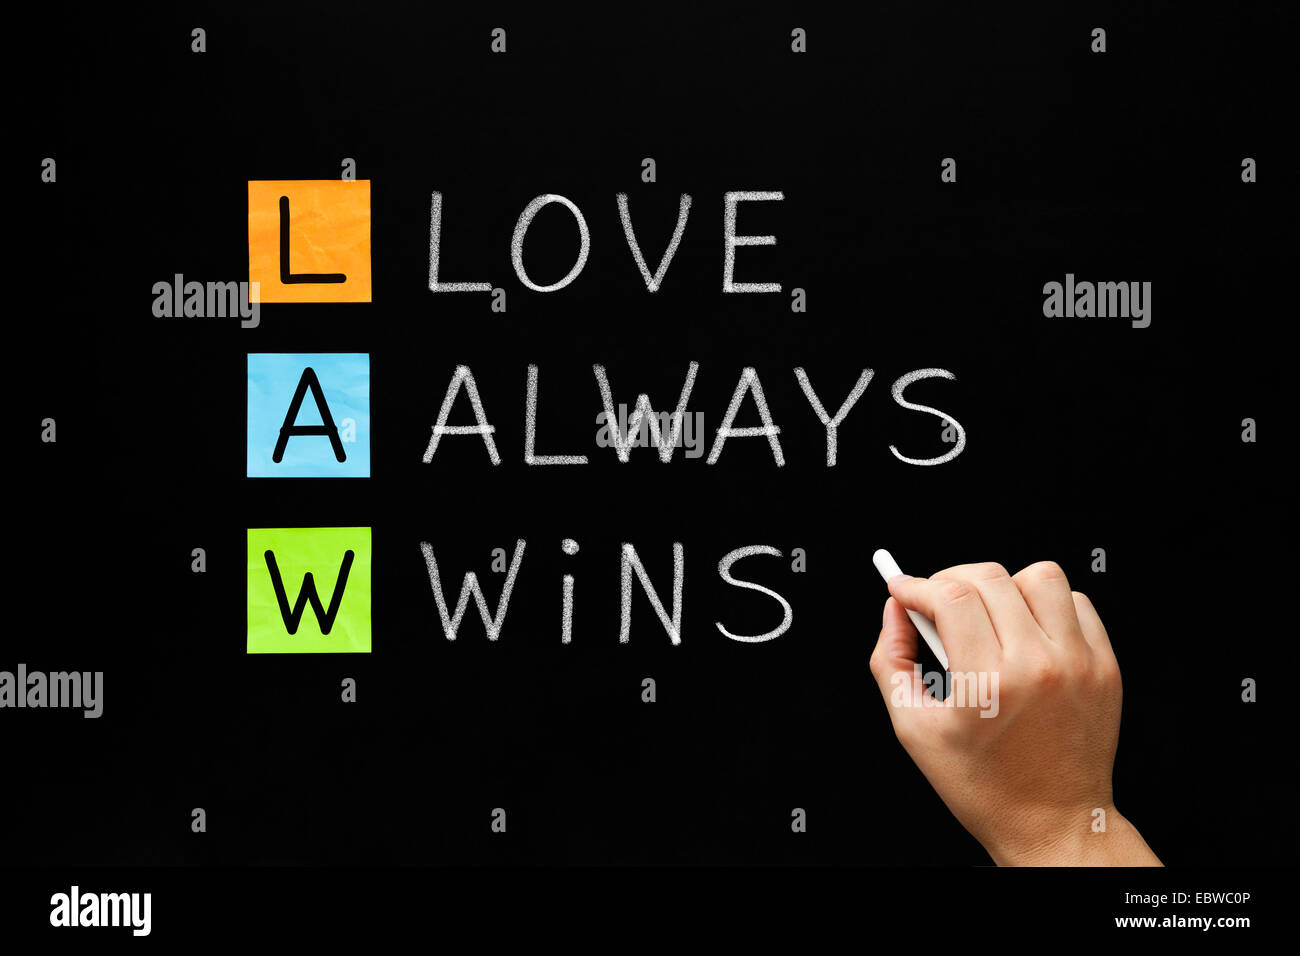 Hand writing LAW - Love Always Wins with white chalk on blackboard. Stock Photo